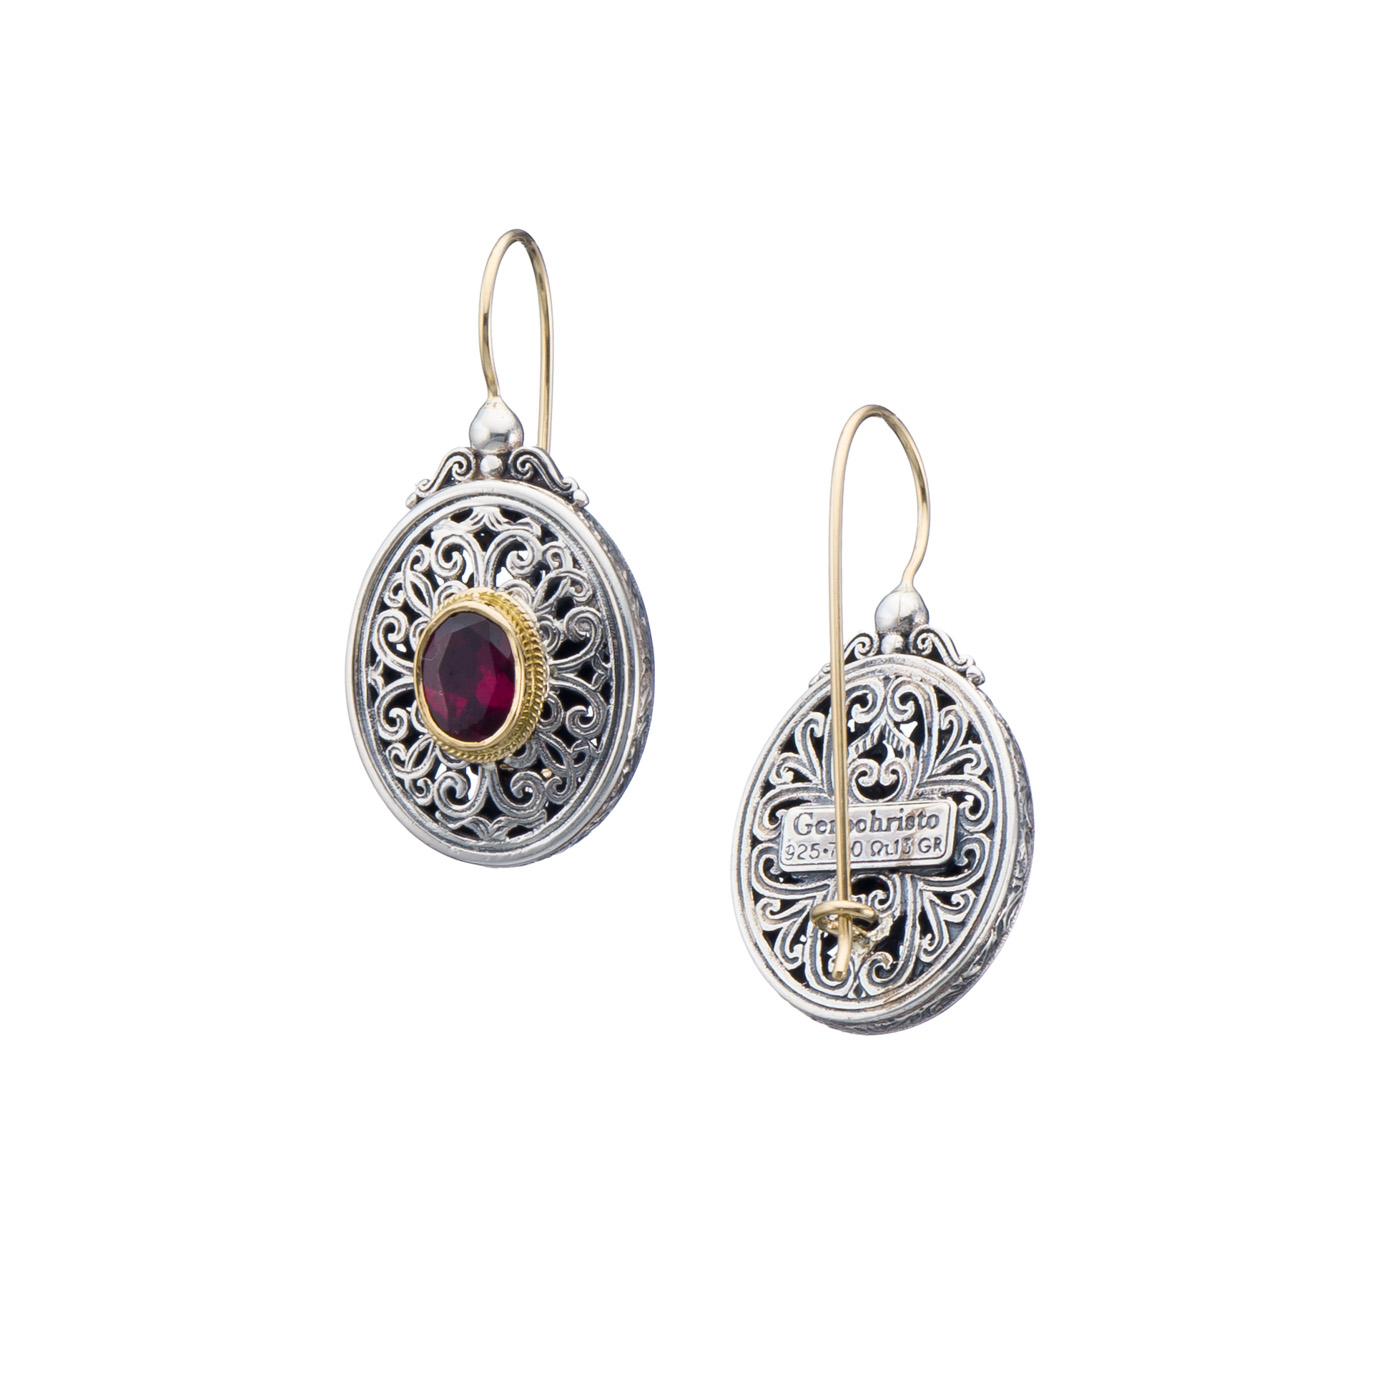 Mediterranean oval earrings in 18K Gold and Sterling Silver with rhodolite